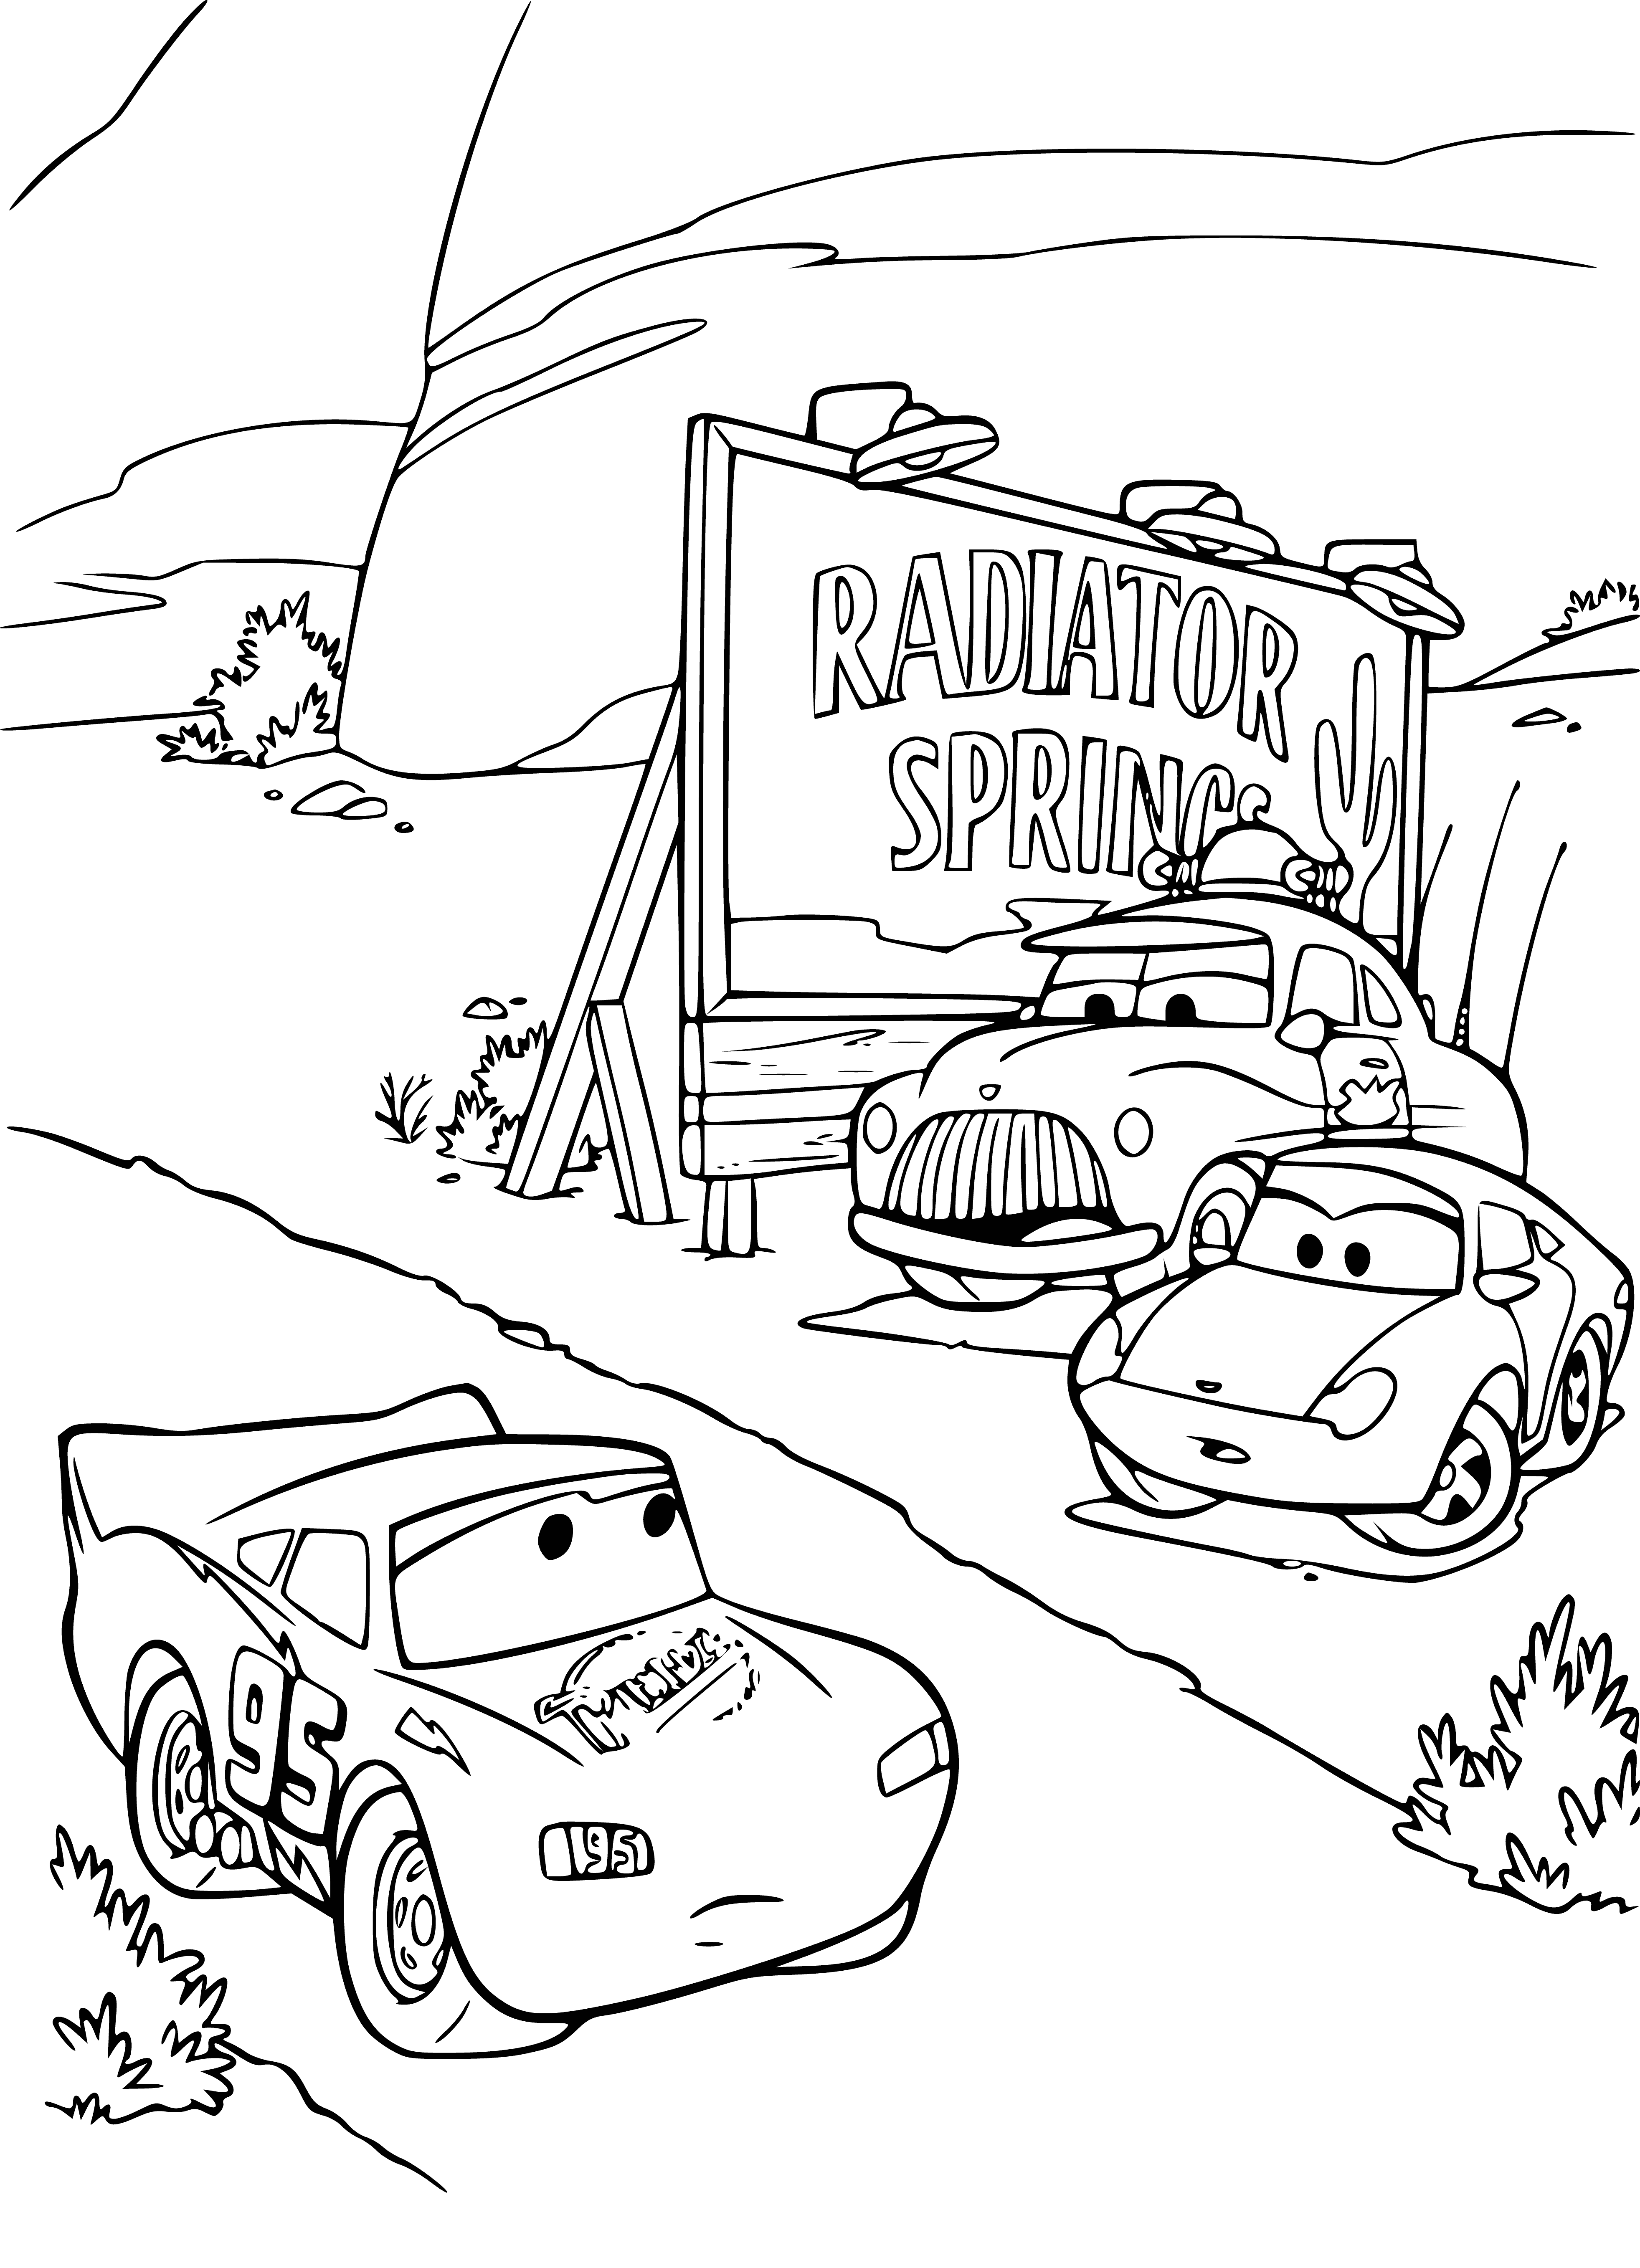 coloring page: Car out of gas, gas station in distance too late: gauge reads "E", car slowly rolls to a stop.